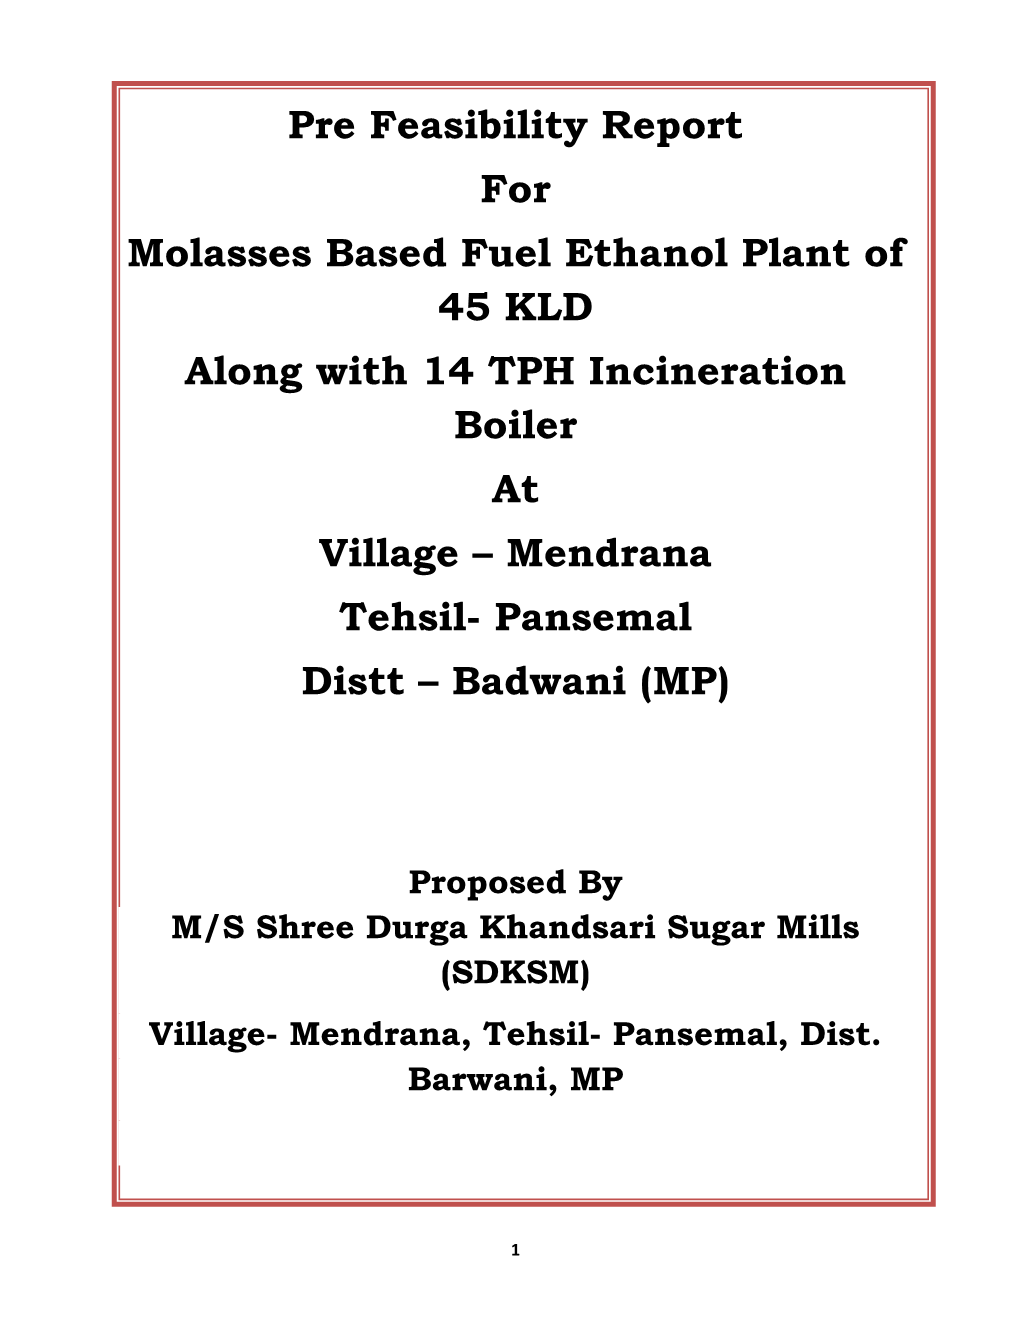 Pre Feasibility Report for Molasses Based Fuel Ethanol Plant of 45 KLD